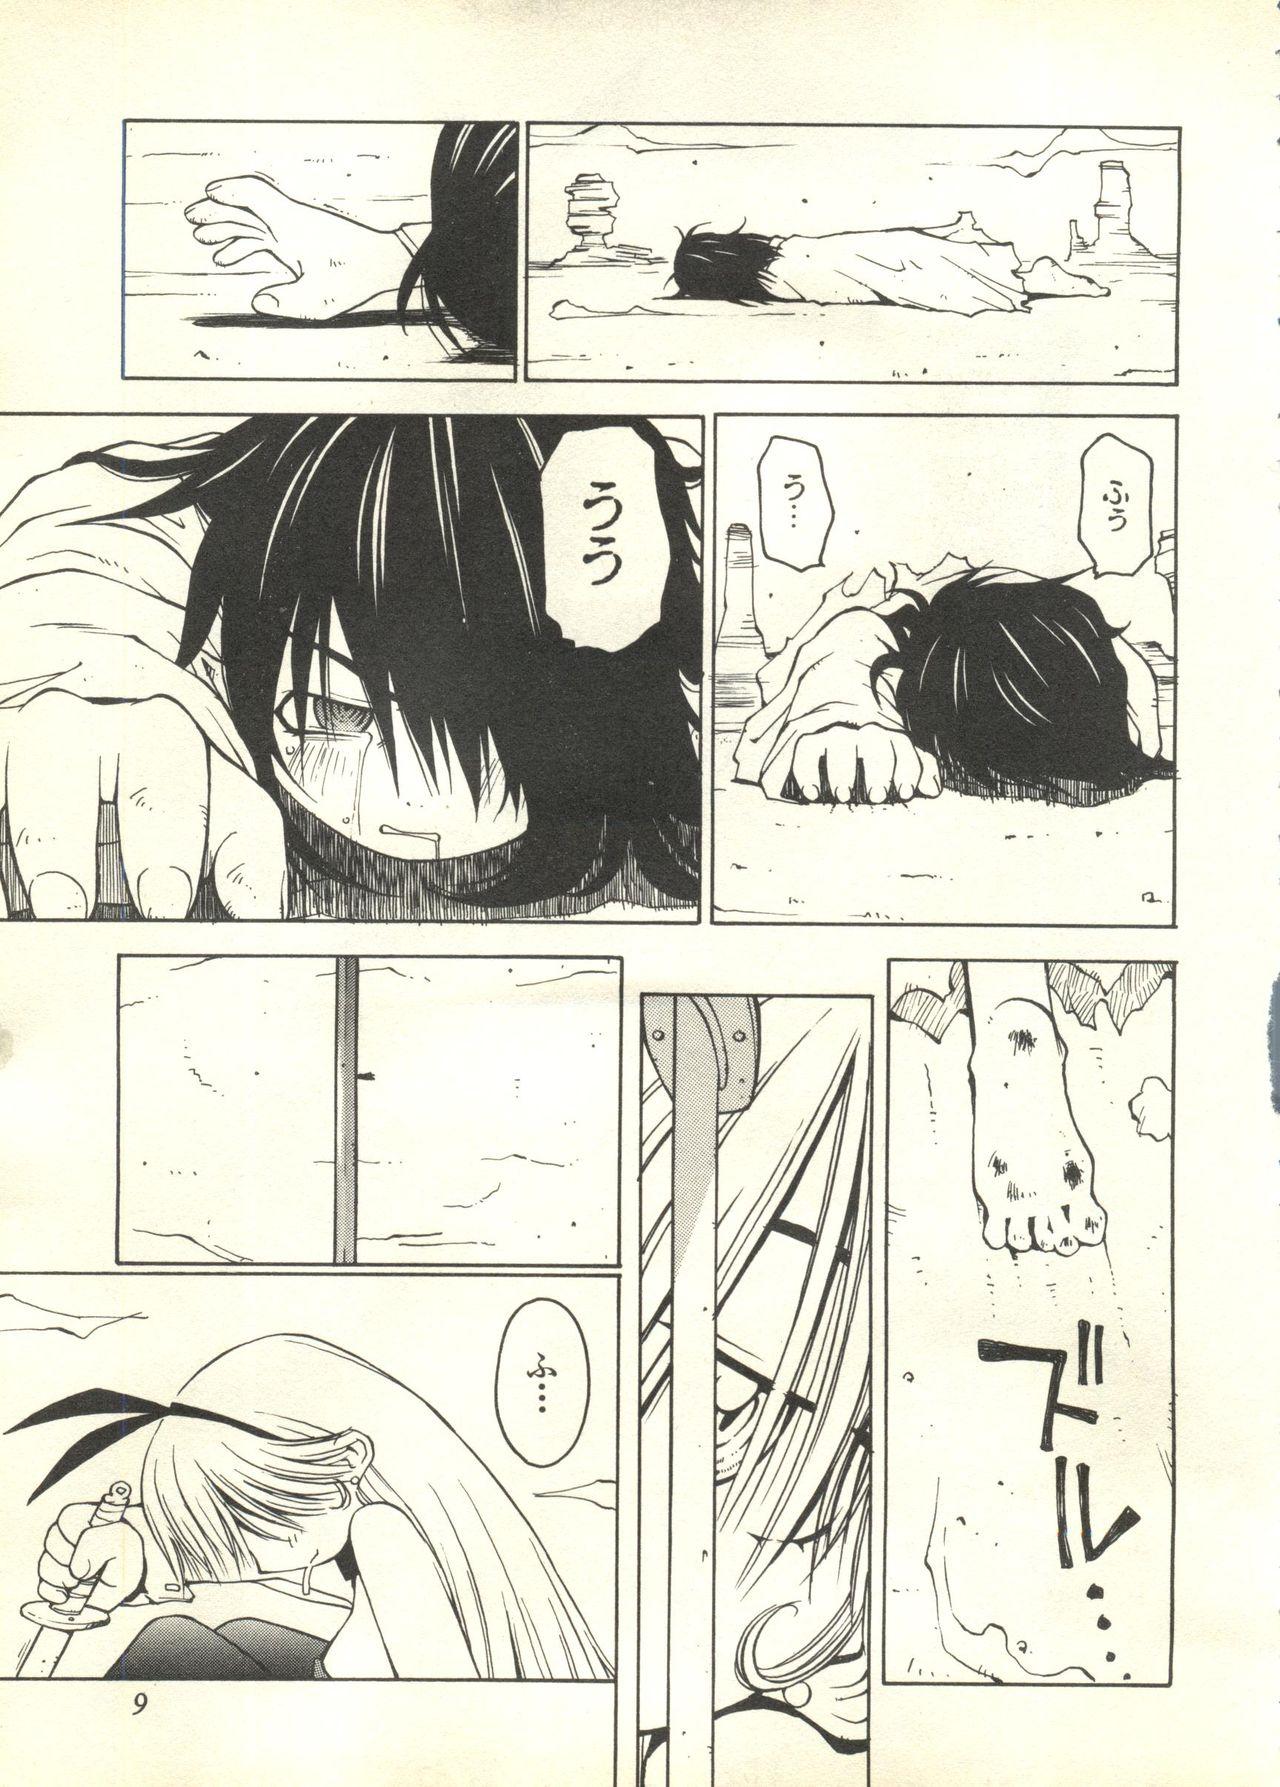 Cum In Pussy Pai;kuu 1999 March Vol. 18 - Kare kano Mamotte shugogetten Publico - Page 10